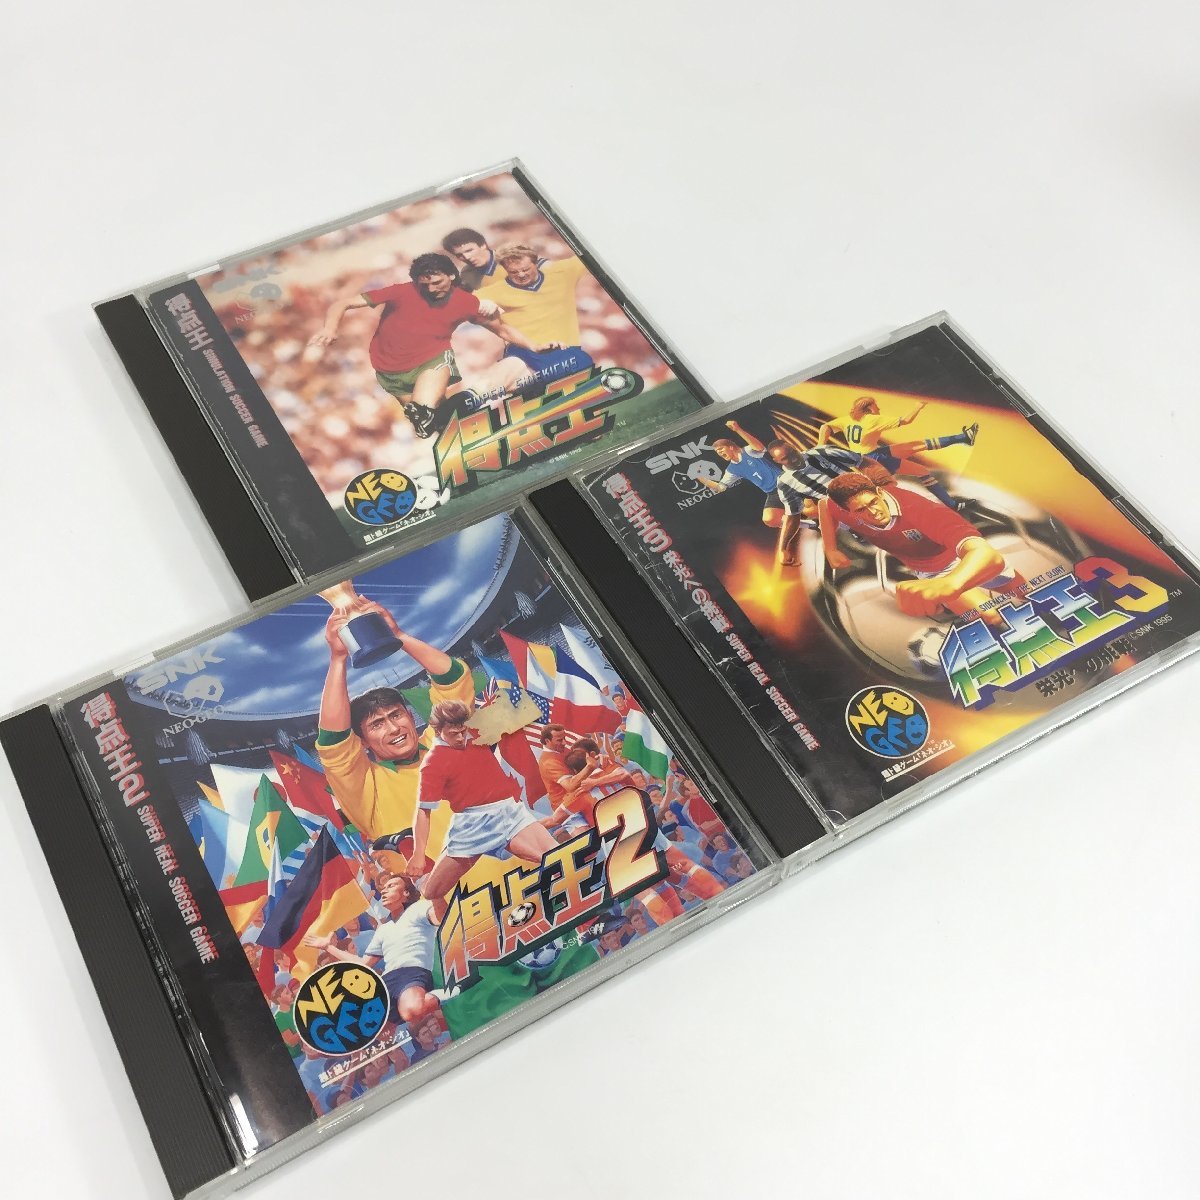 Buy SNK Neo Geo CD Video Games on the Store, Auctions